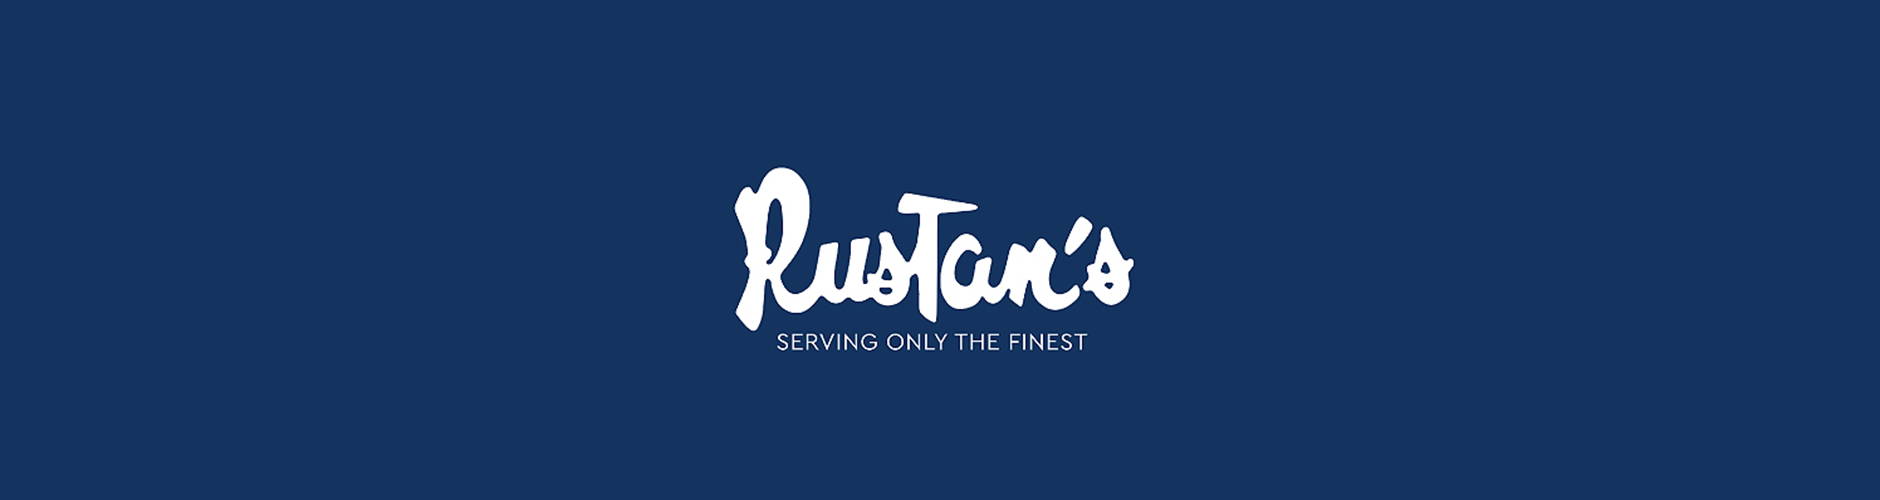 Rustans.com Delivery Update May 18, 2020